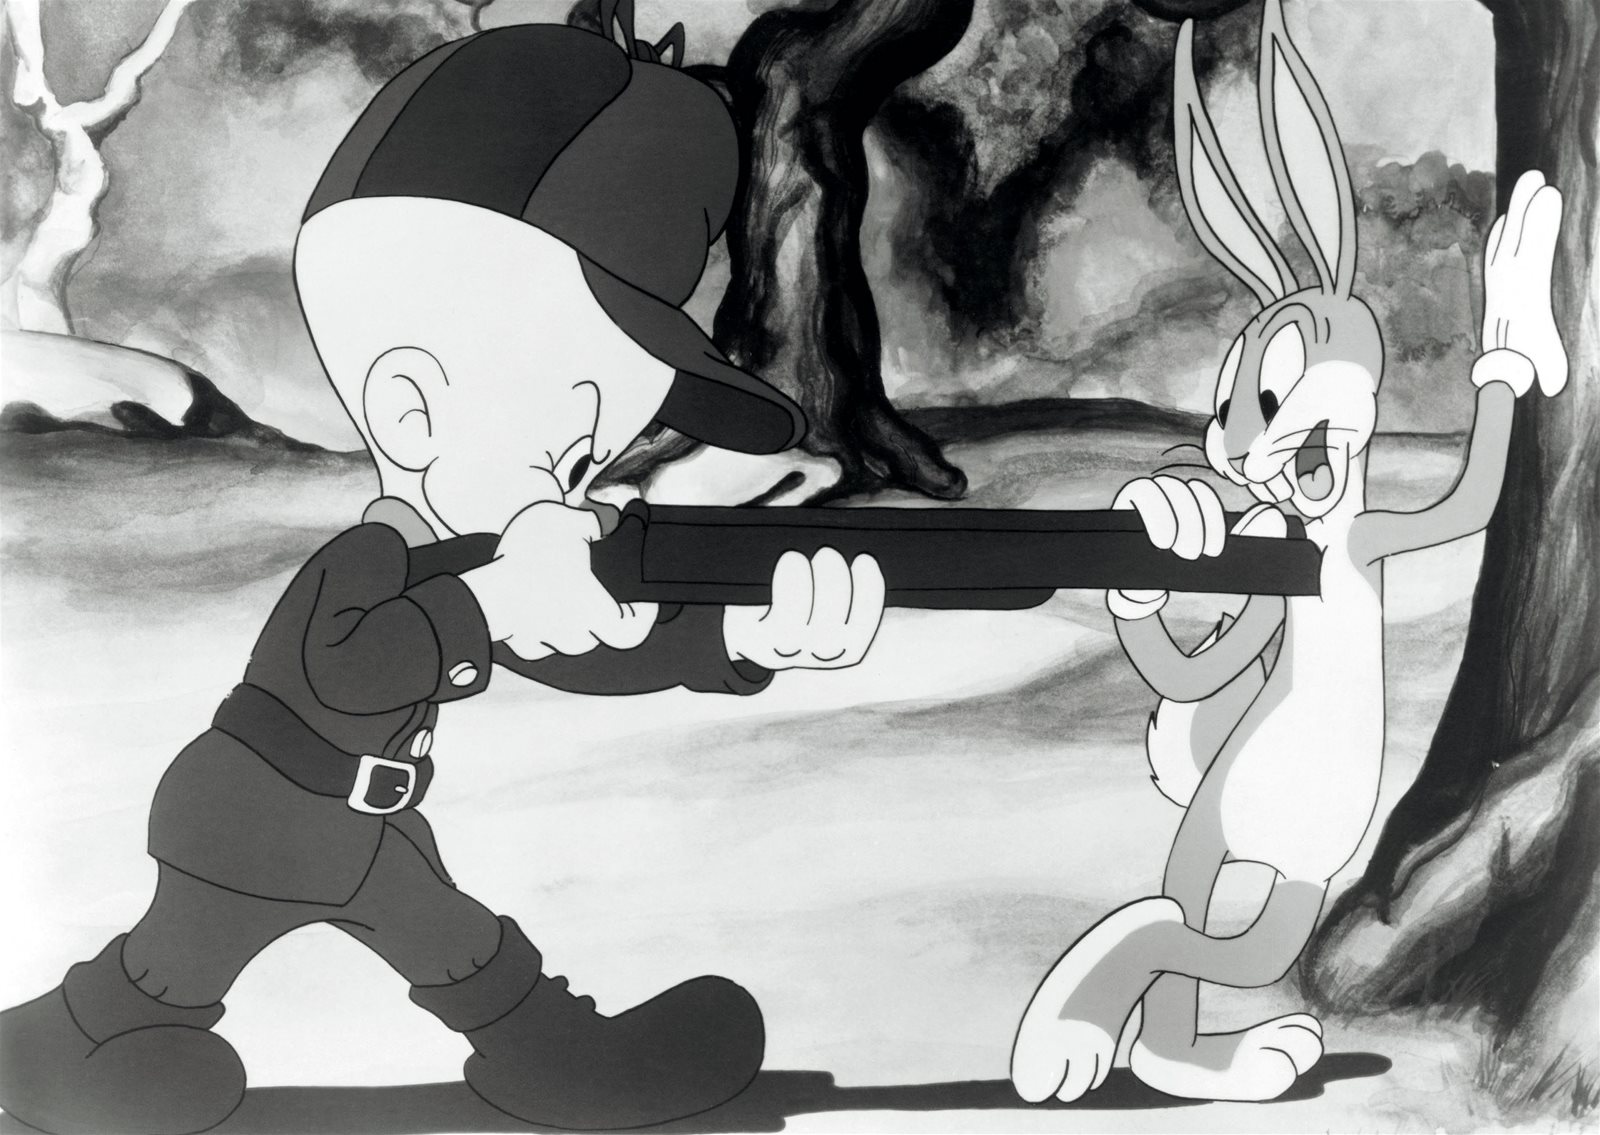 BUGS BUNNY MAKES HIS DEBUT | All About History Issue 106